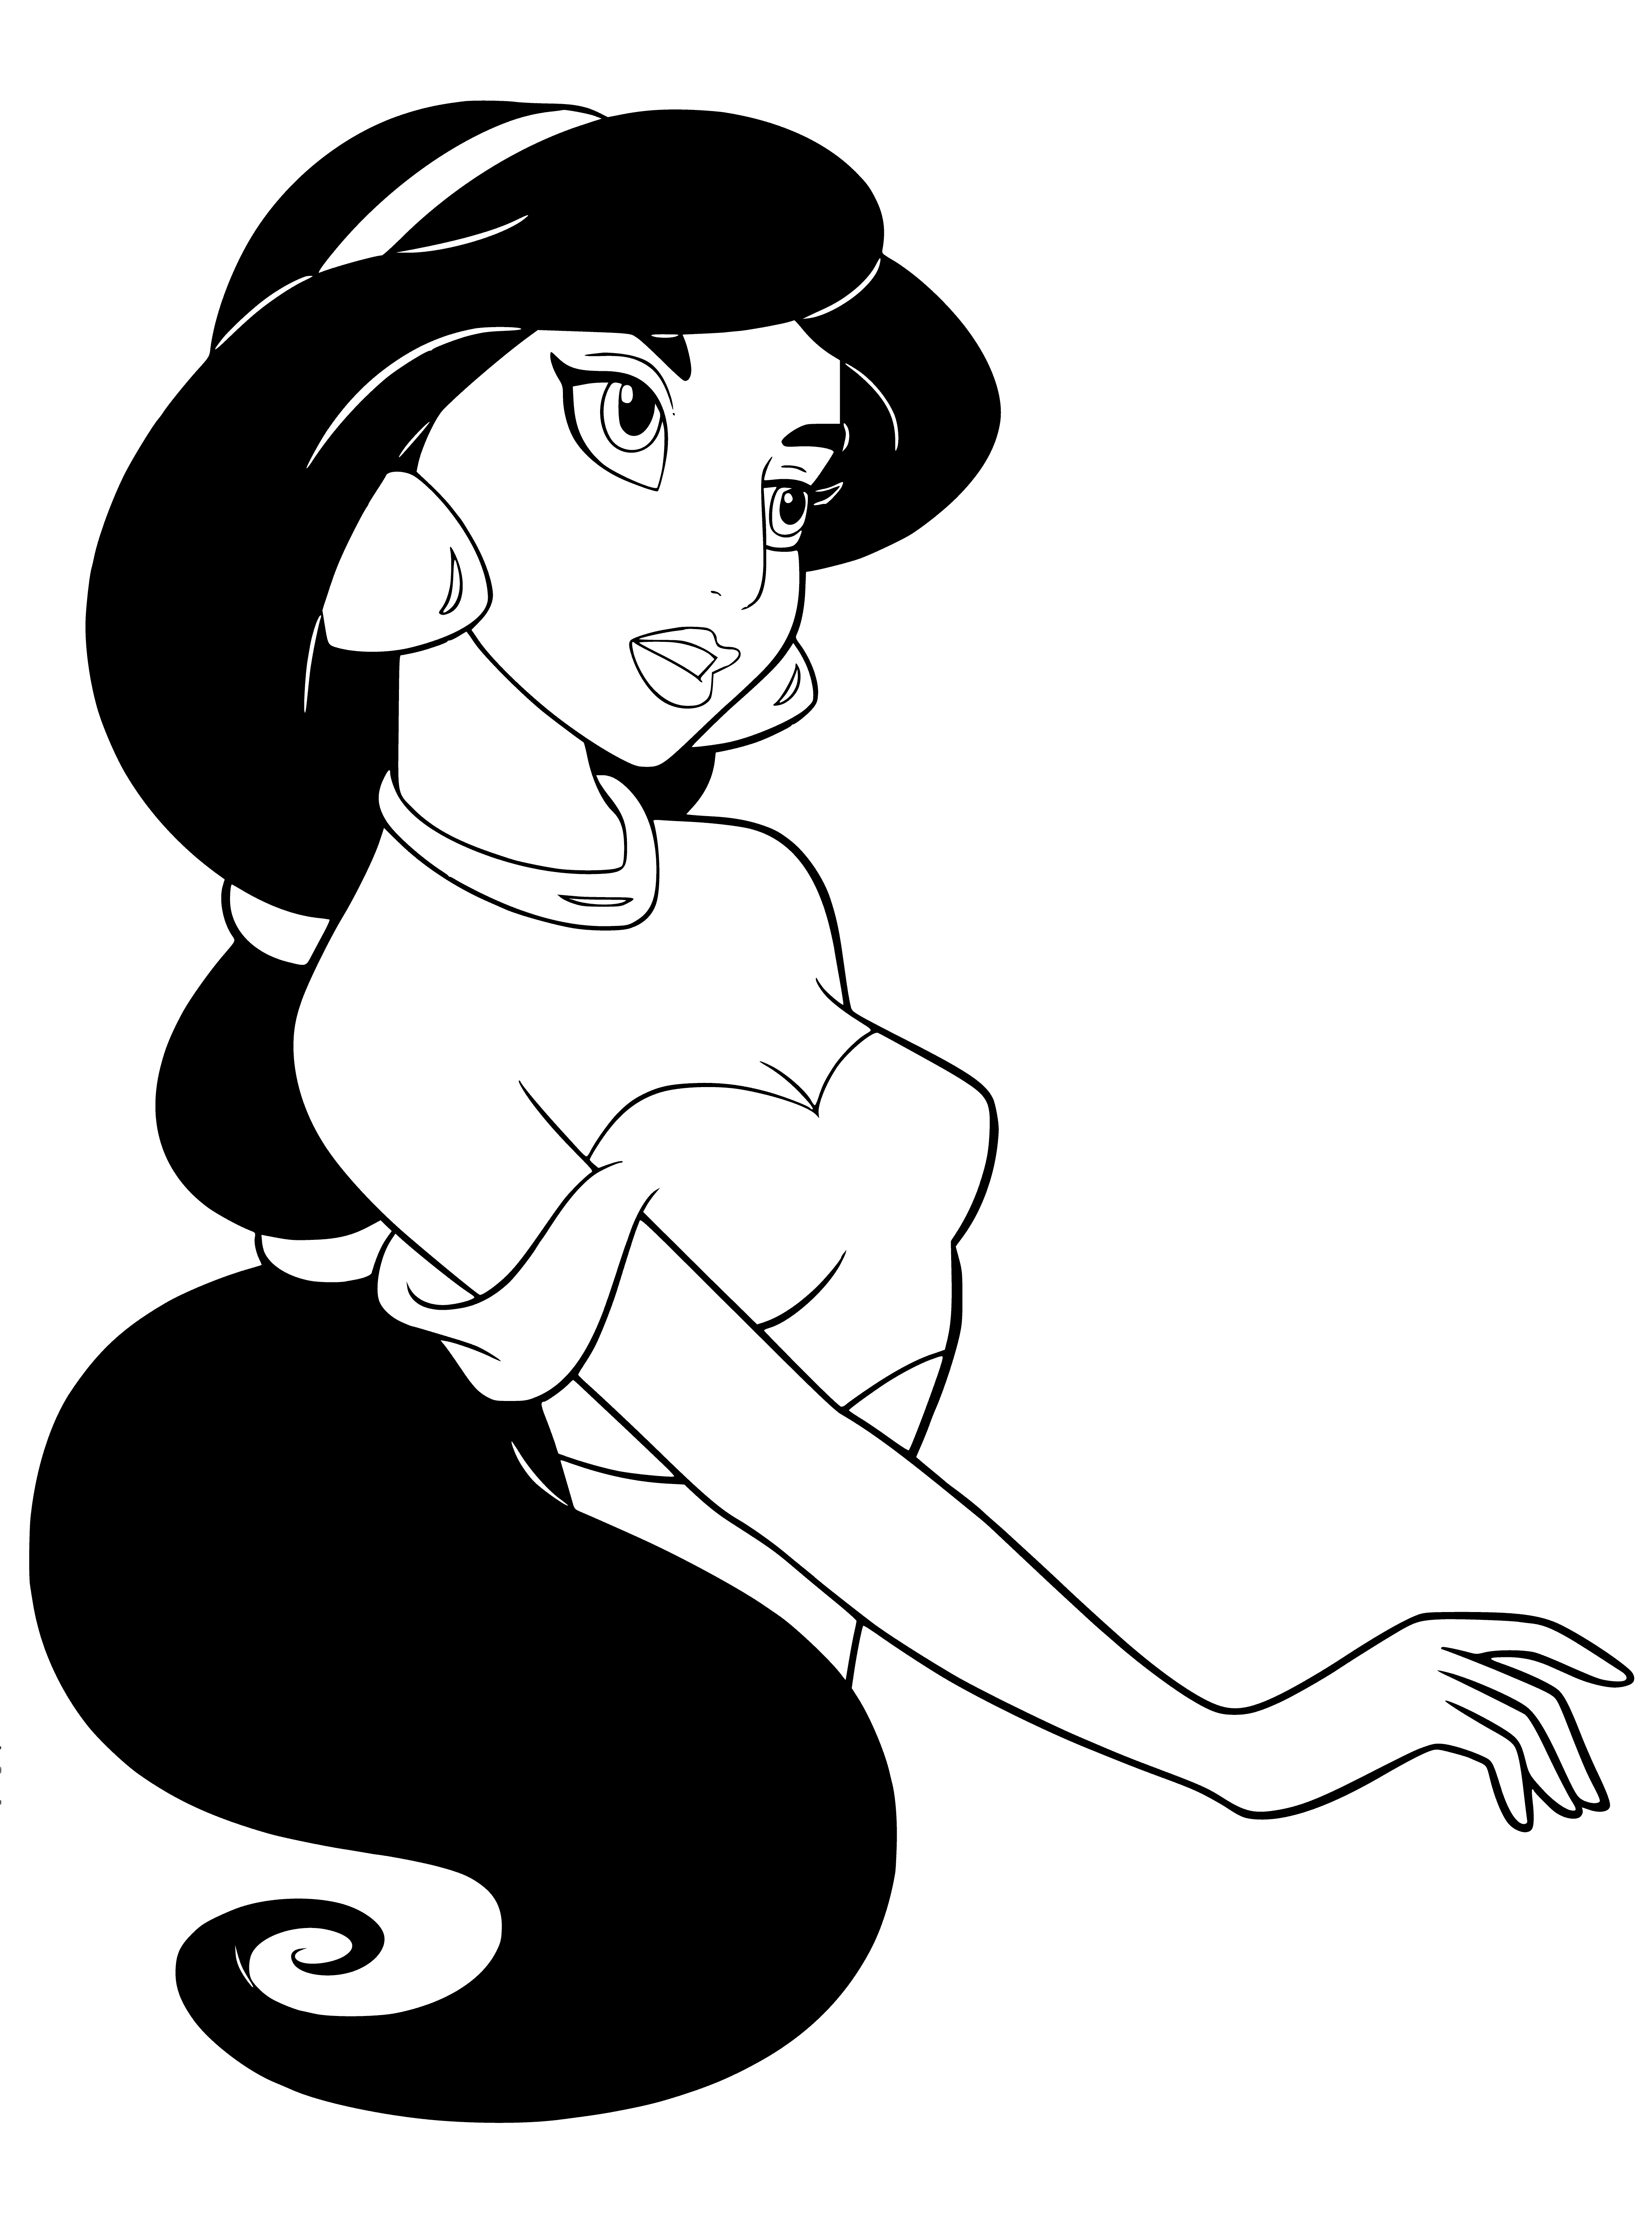 coloring page: Jasmine stands tall in a purple dress and golden headband, her dark hair cascading past her brown skin and a beautiful blue & white jar behind her.